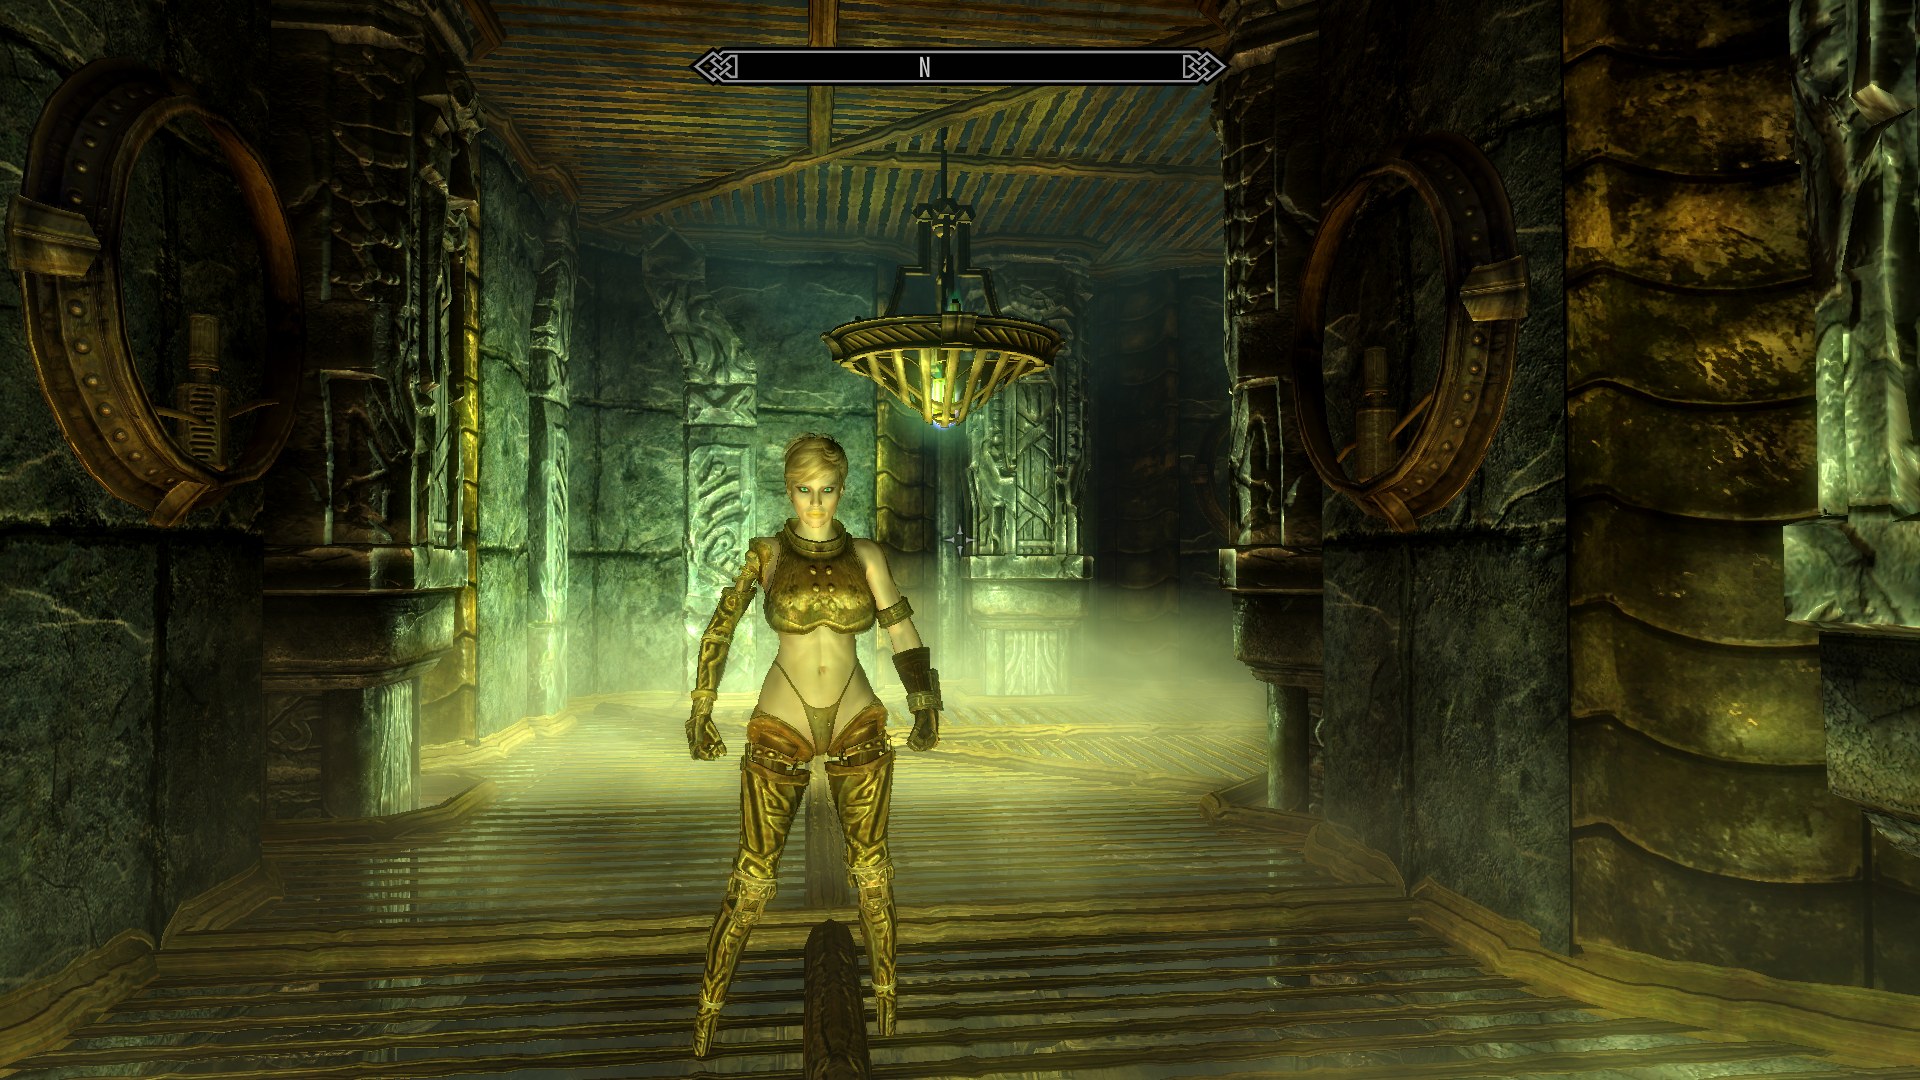 Gallery of Skyrim Dwemer Outfit Mod.